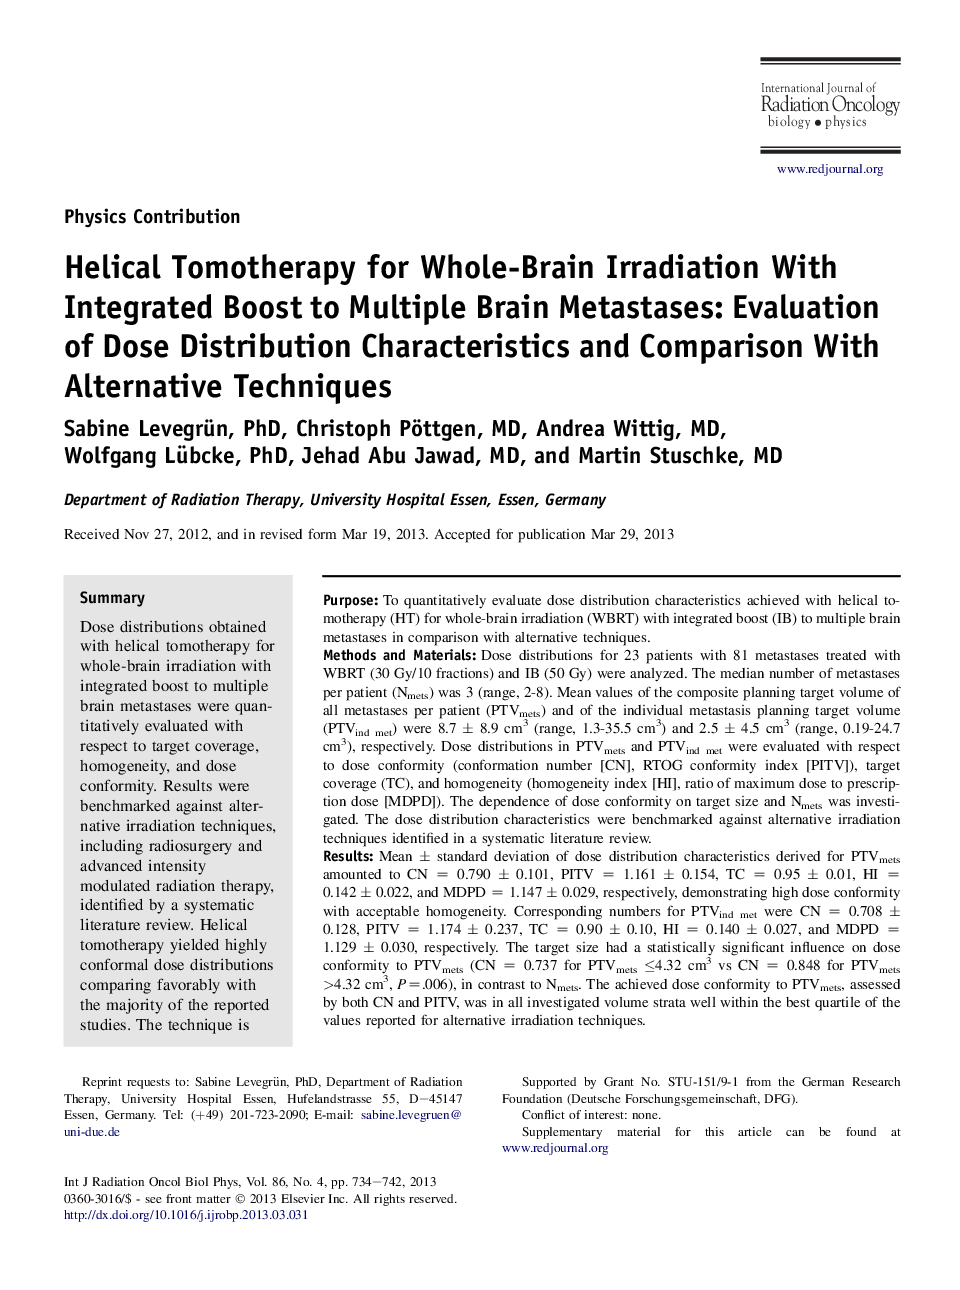 Helical Tomotherapy for Whole-Brain Irradiation With Integrated Boost to Multiple Brain Metastases: Evaluation of Dose Distribution Characteristics and Comparison With Alternative Techniques